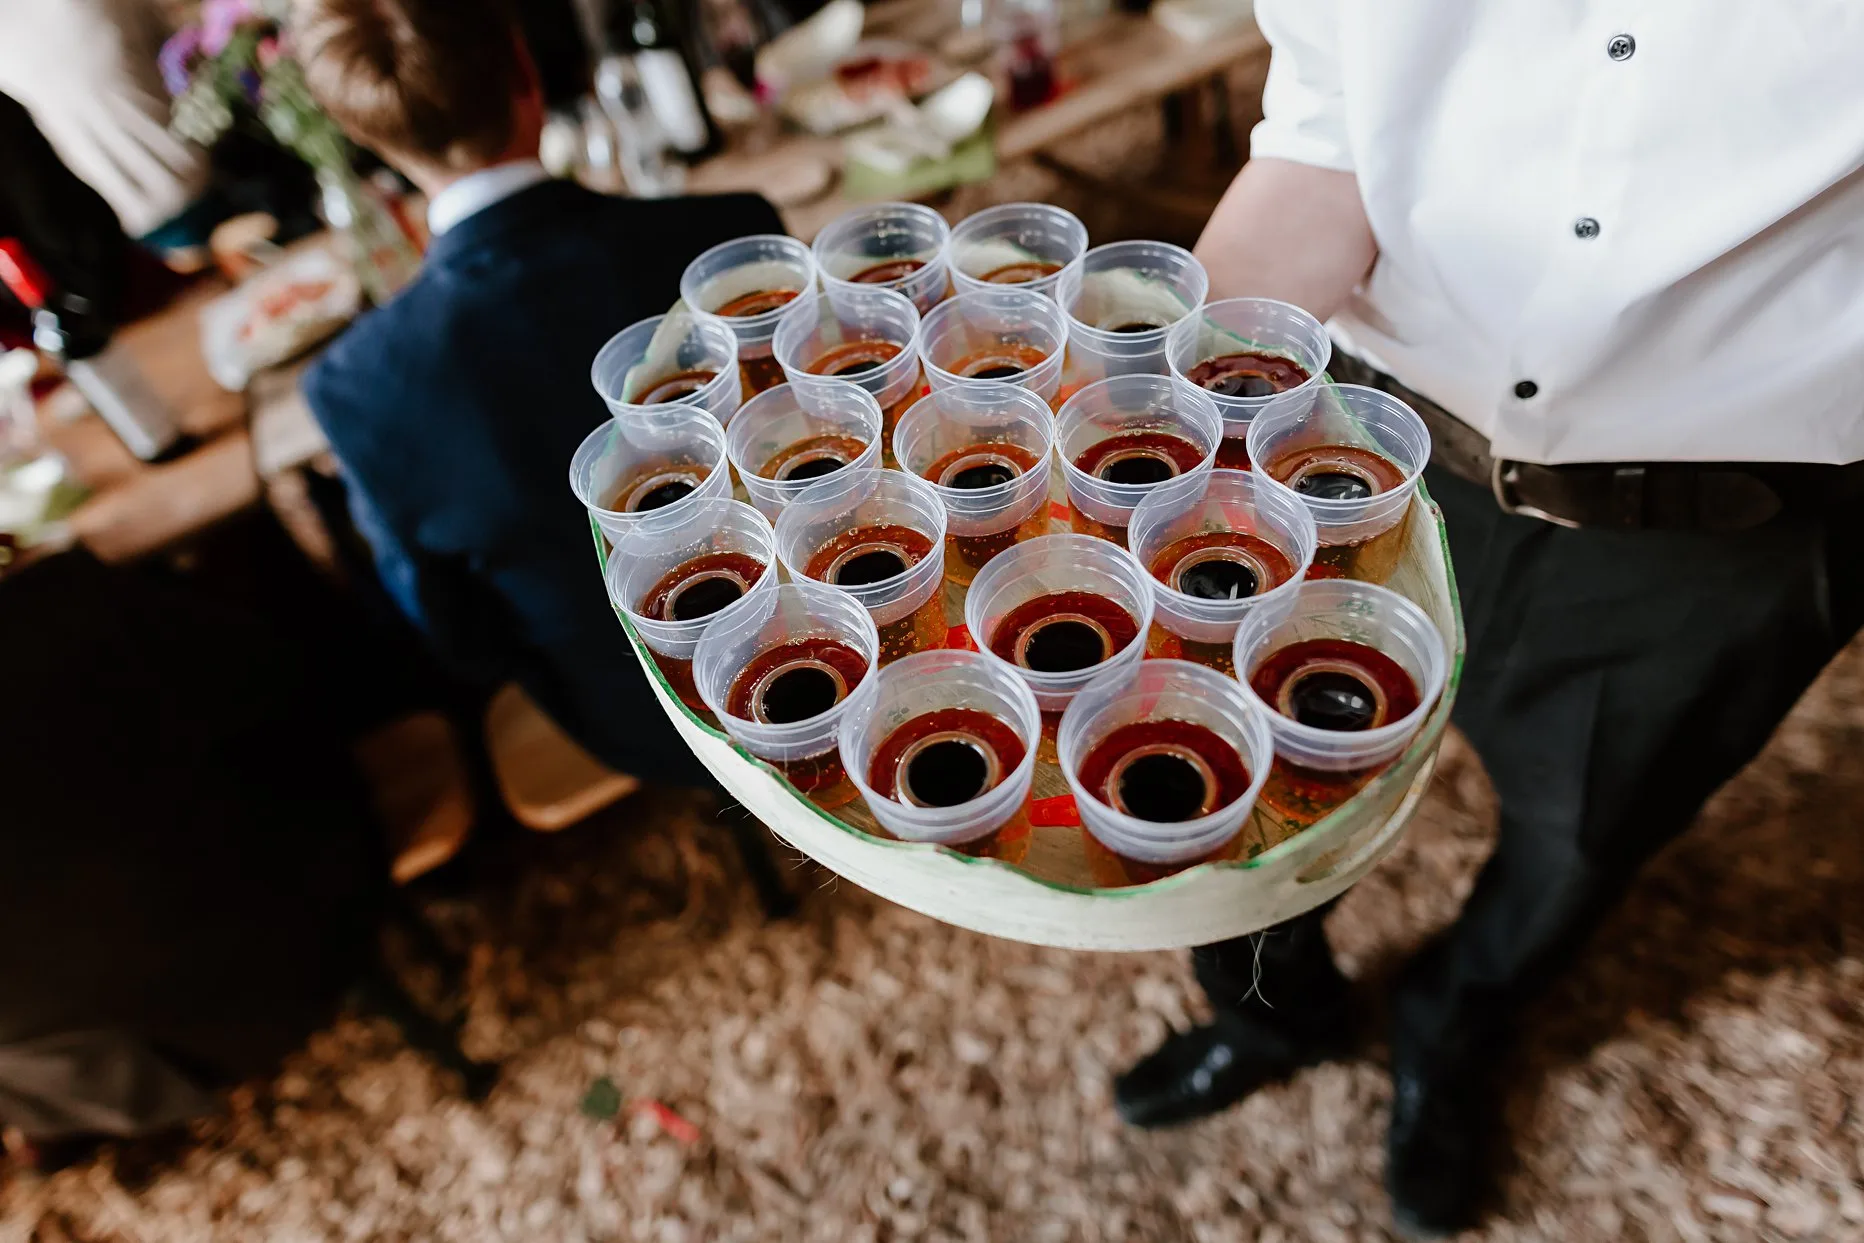 A tray of about 20 Jägerbomb shots held by a wedding guest.